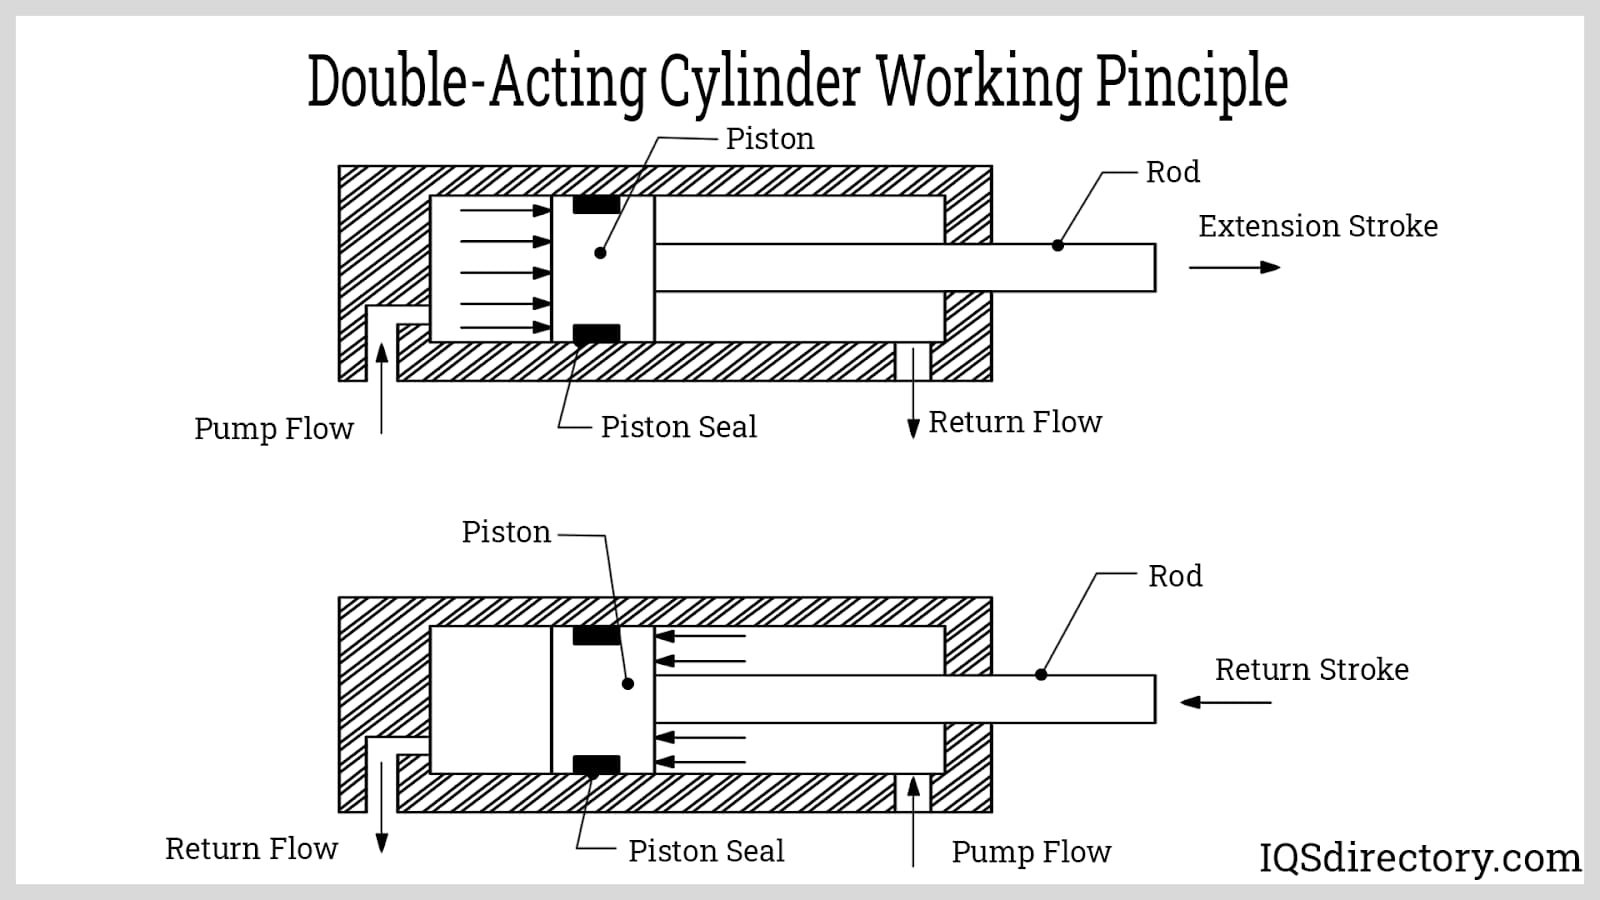 Double-Acting Cylinder Working Principle